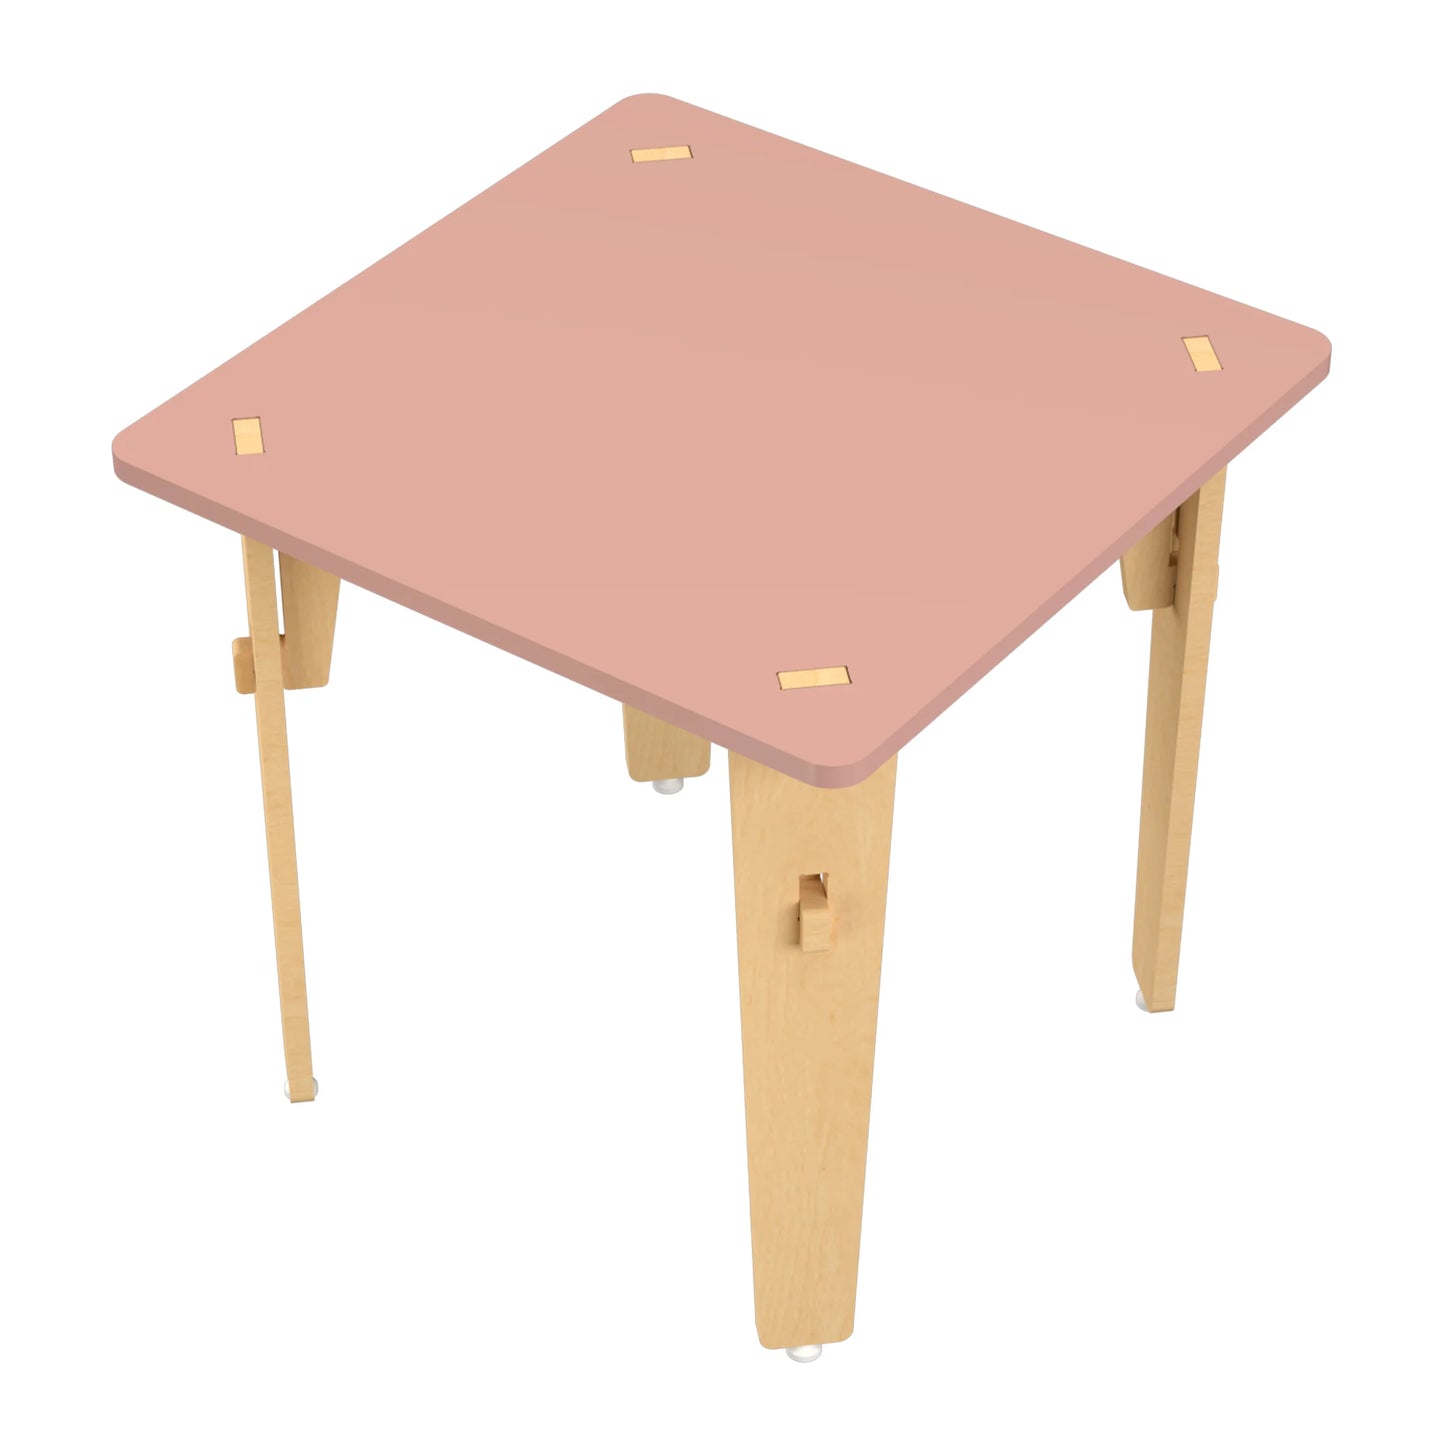 Buy Lime Fig Wooden Table - Pink (21 Inches) - Upper View - SkilloToys.com